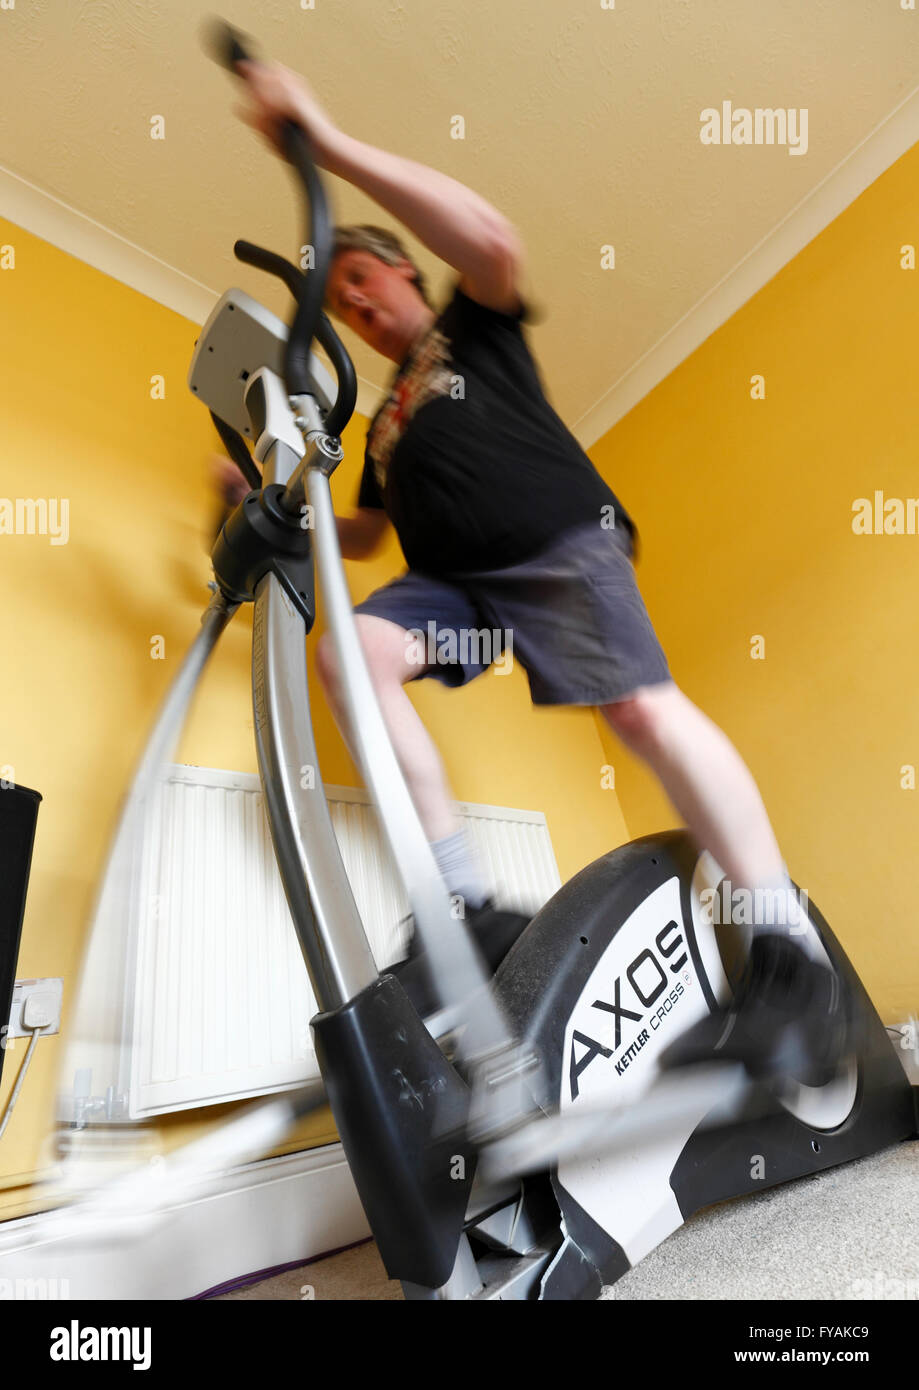 Middle age man using a crosstrainer exercise machine. Stock Photo